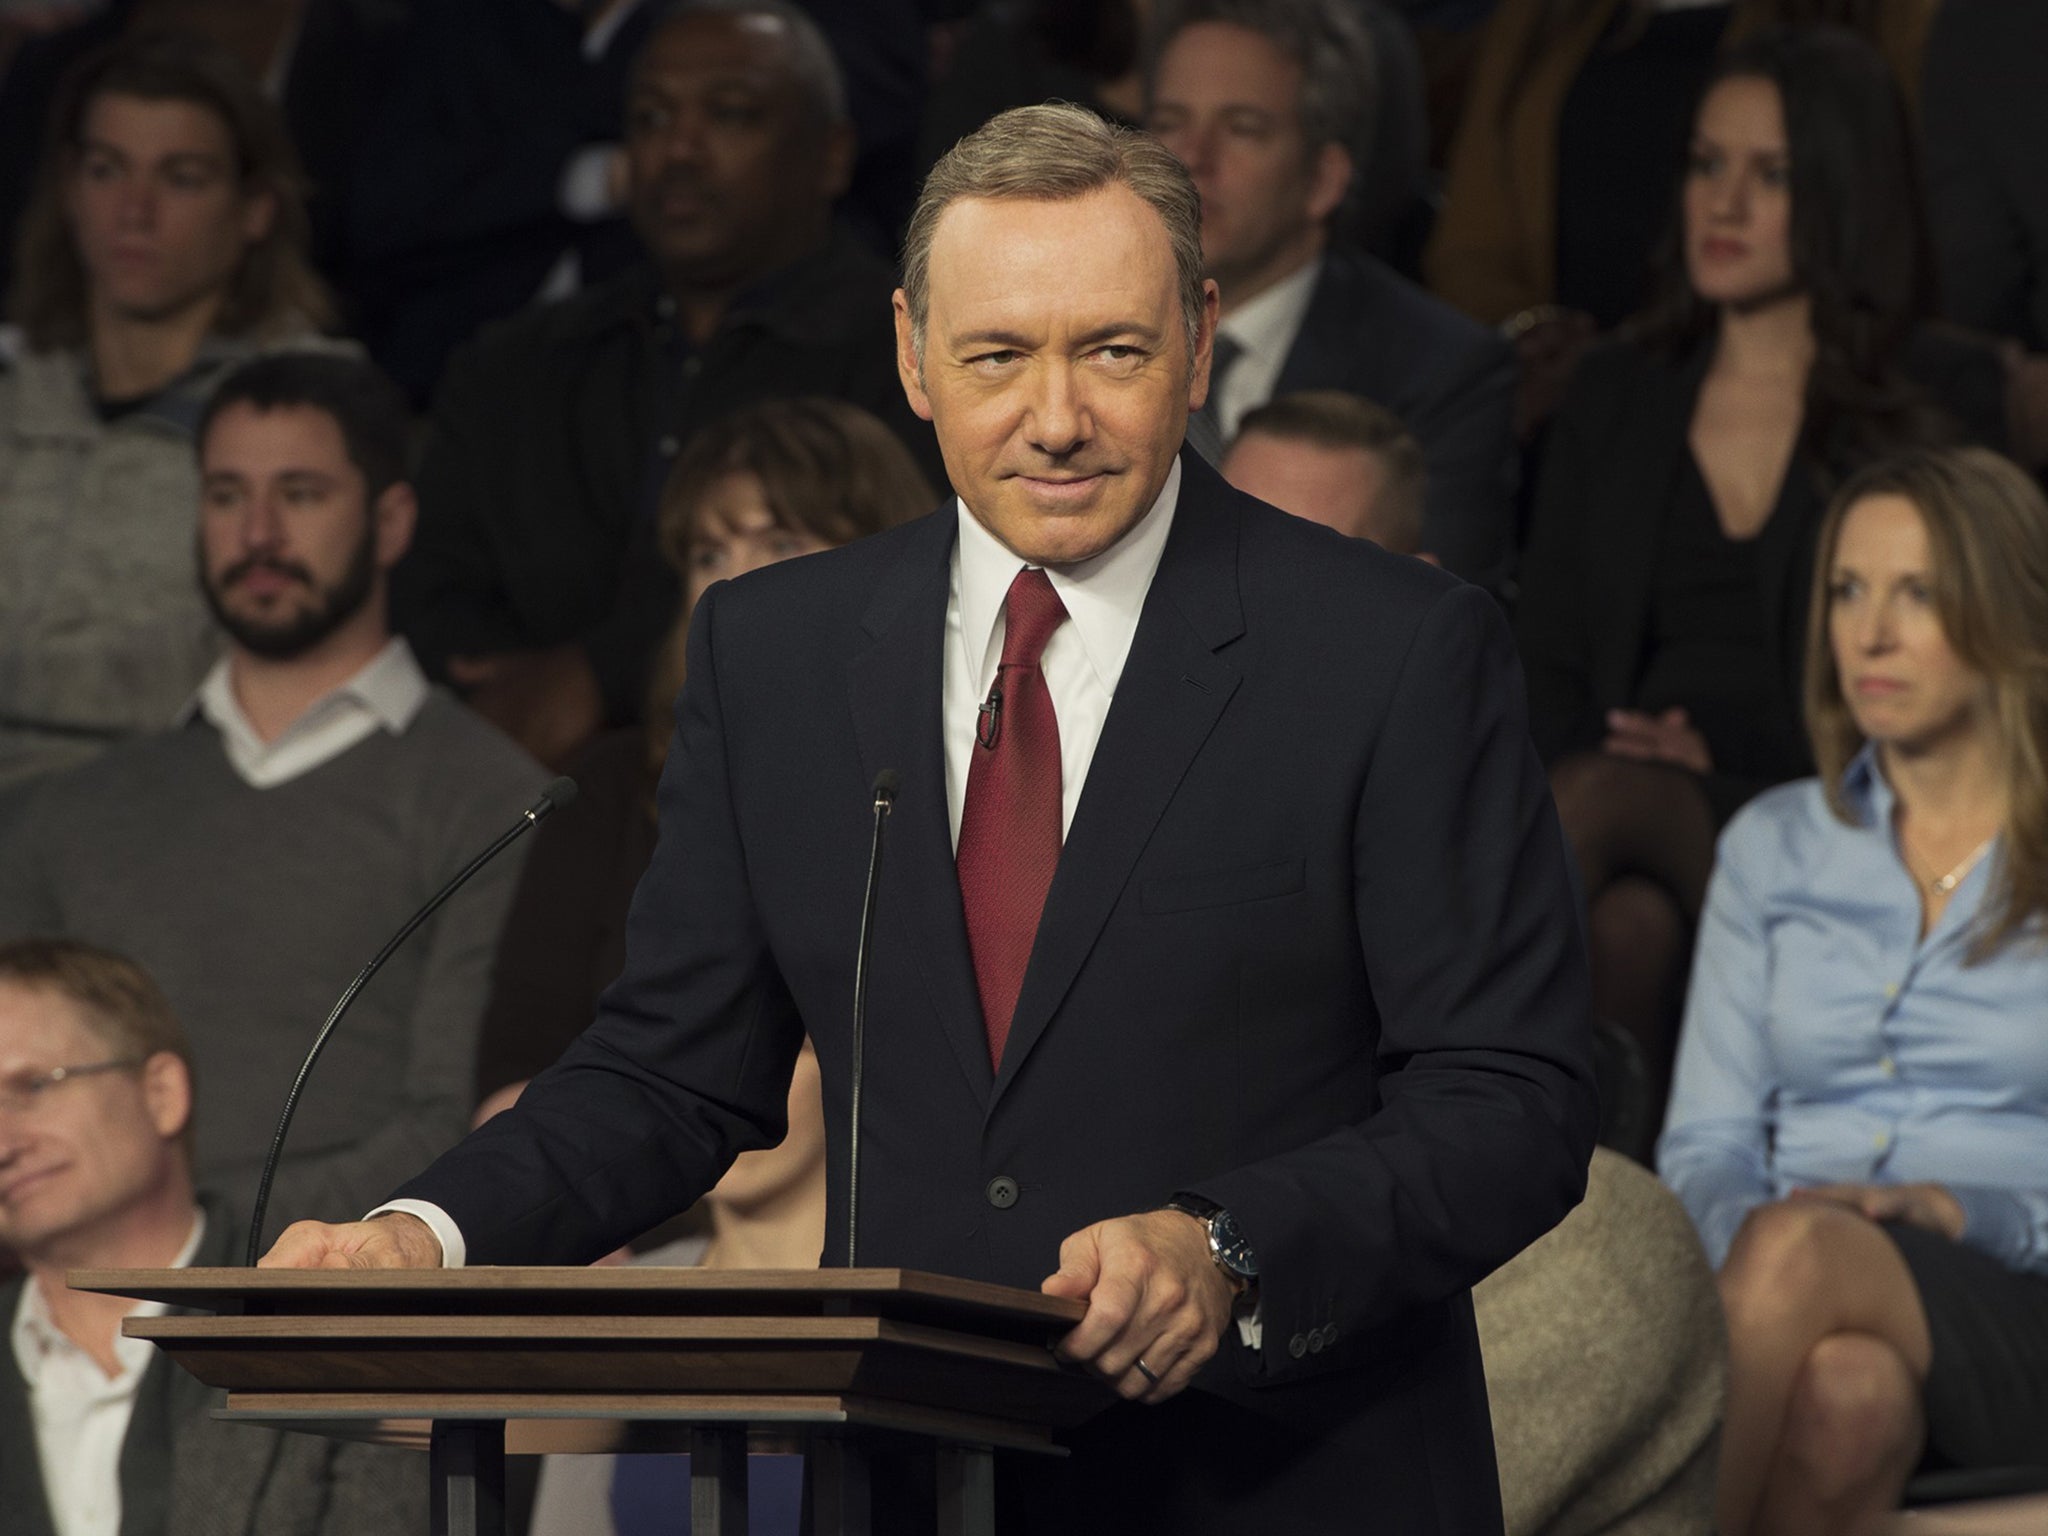 Season three of 'House of Cards' will be returning later this month